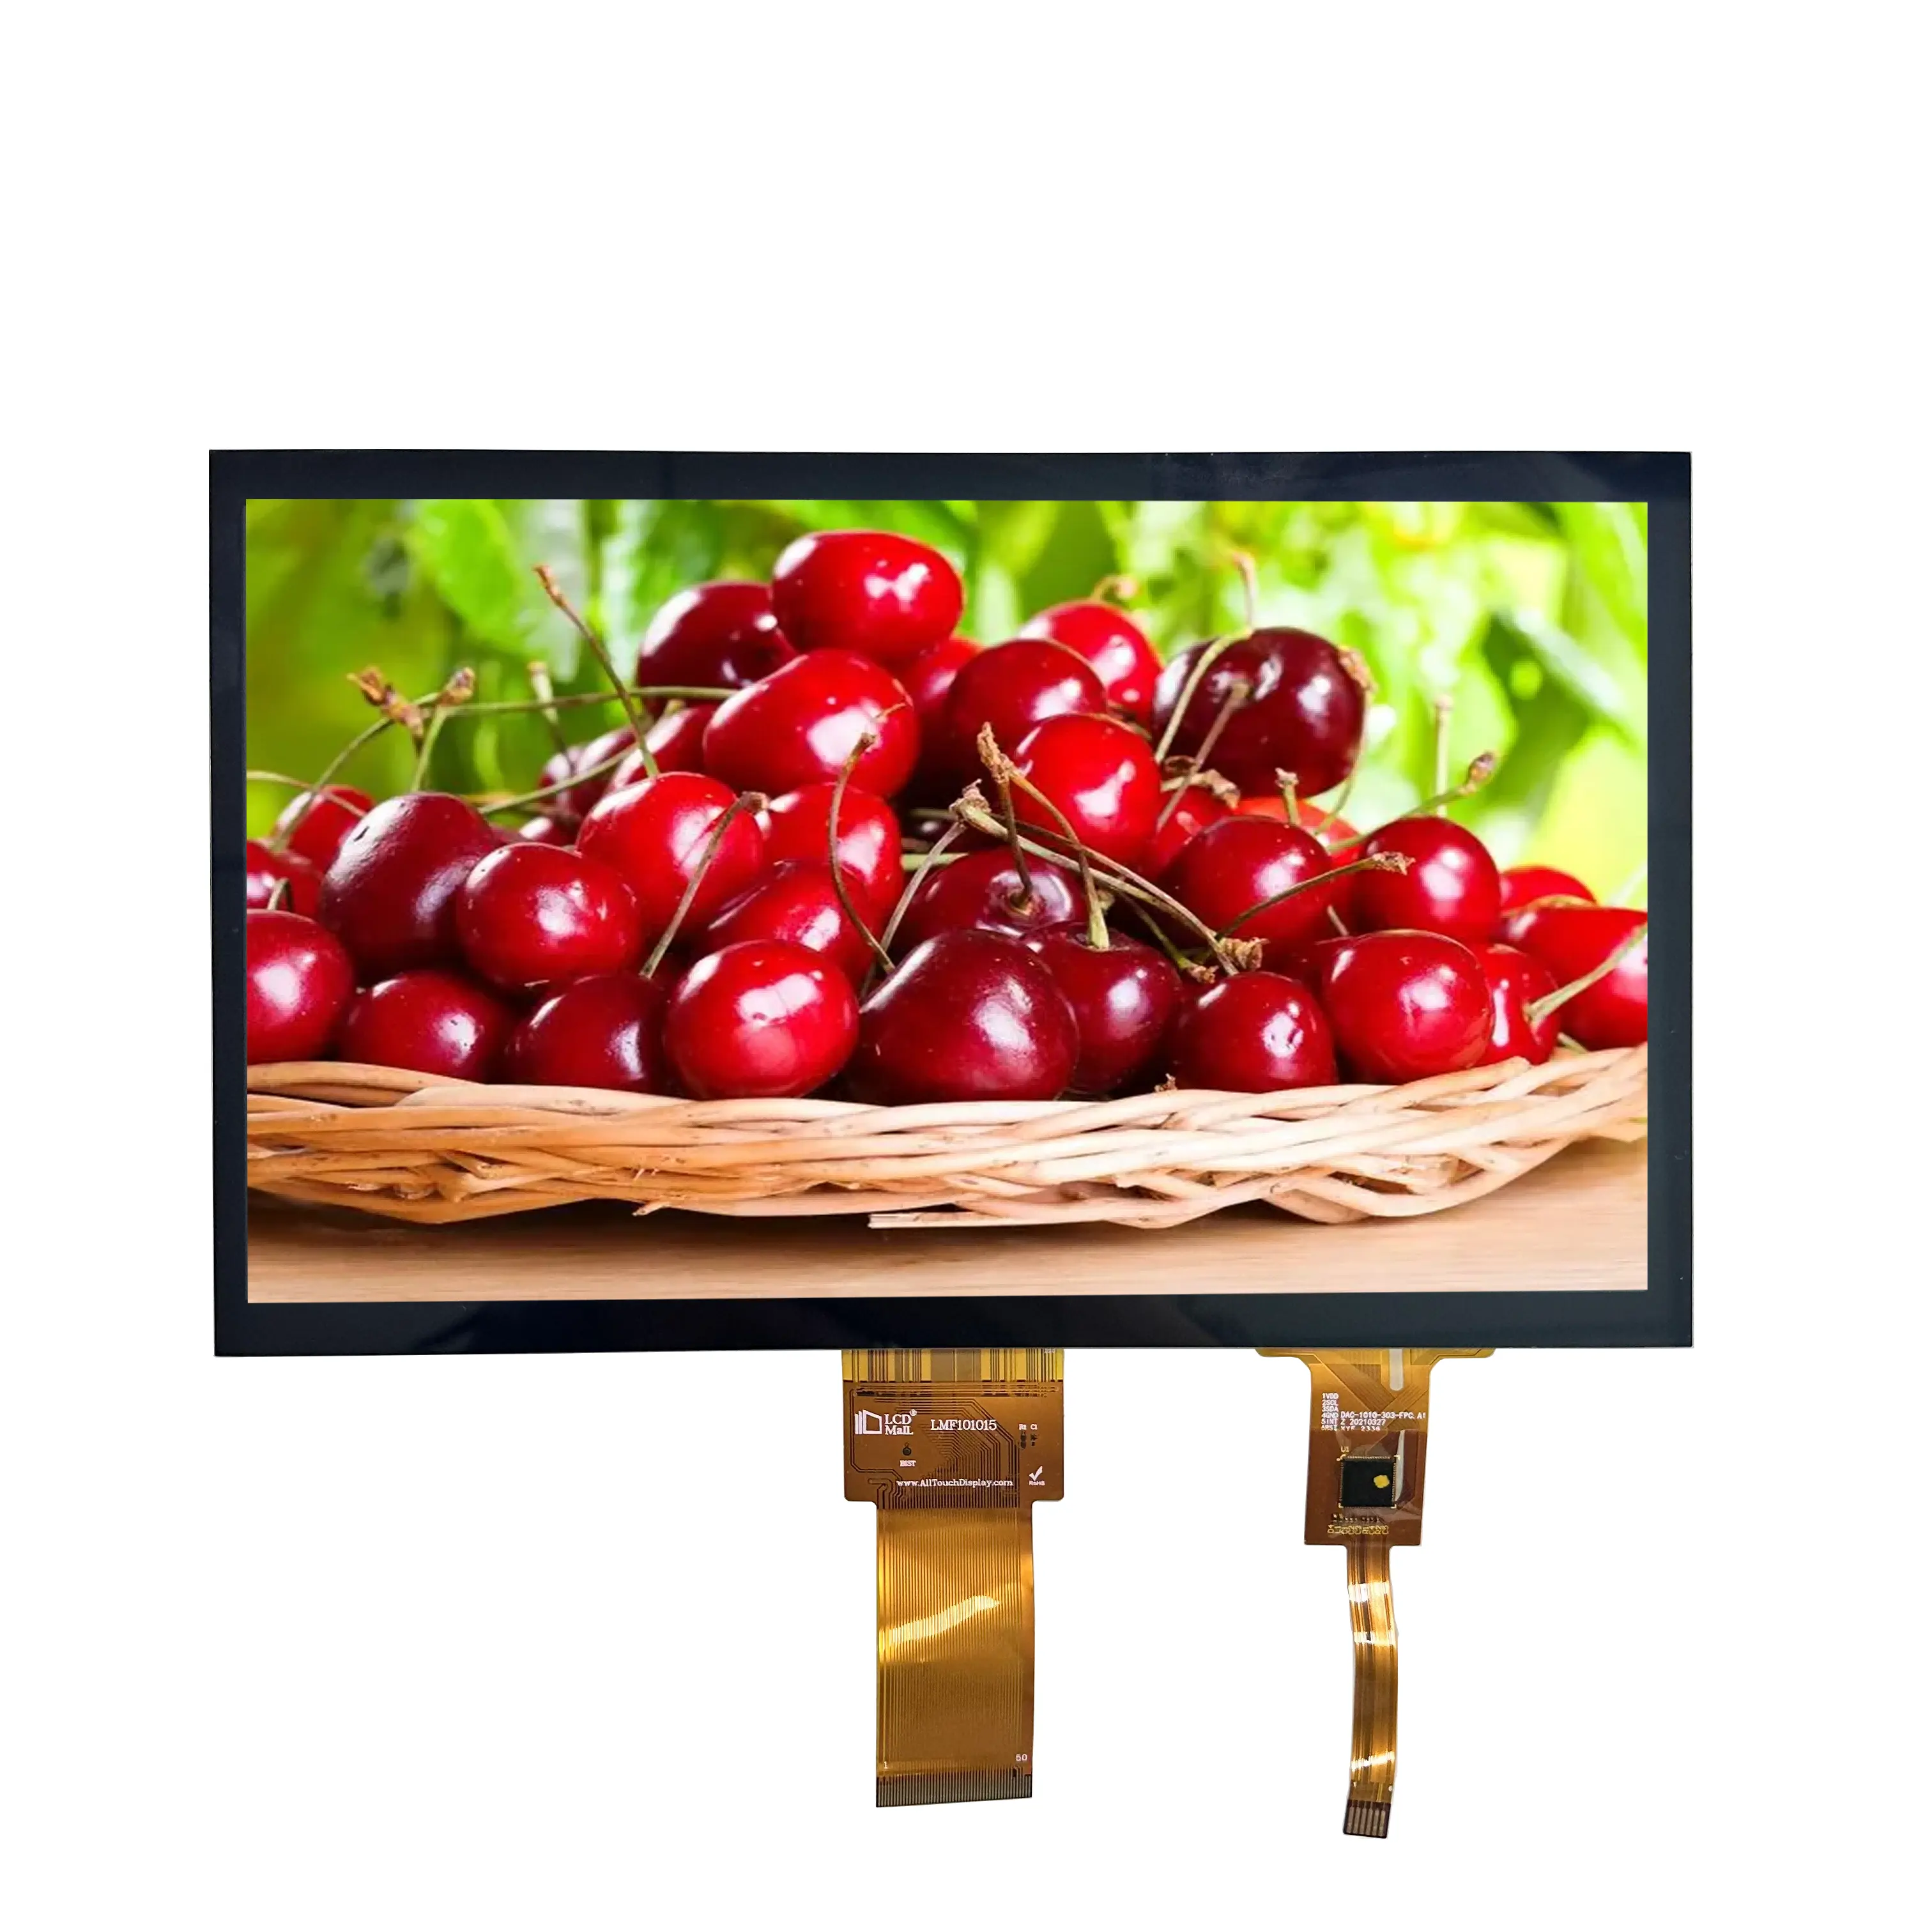 IPS LCD Module 10.1 Inch TFT LCD Display 1024*600 Resolution Capacitive Touch With RGB Interface For Printer